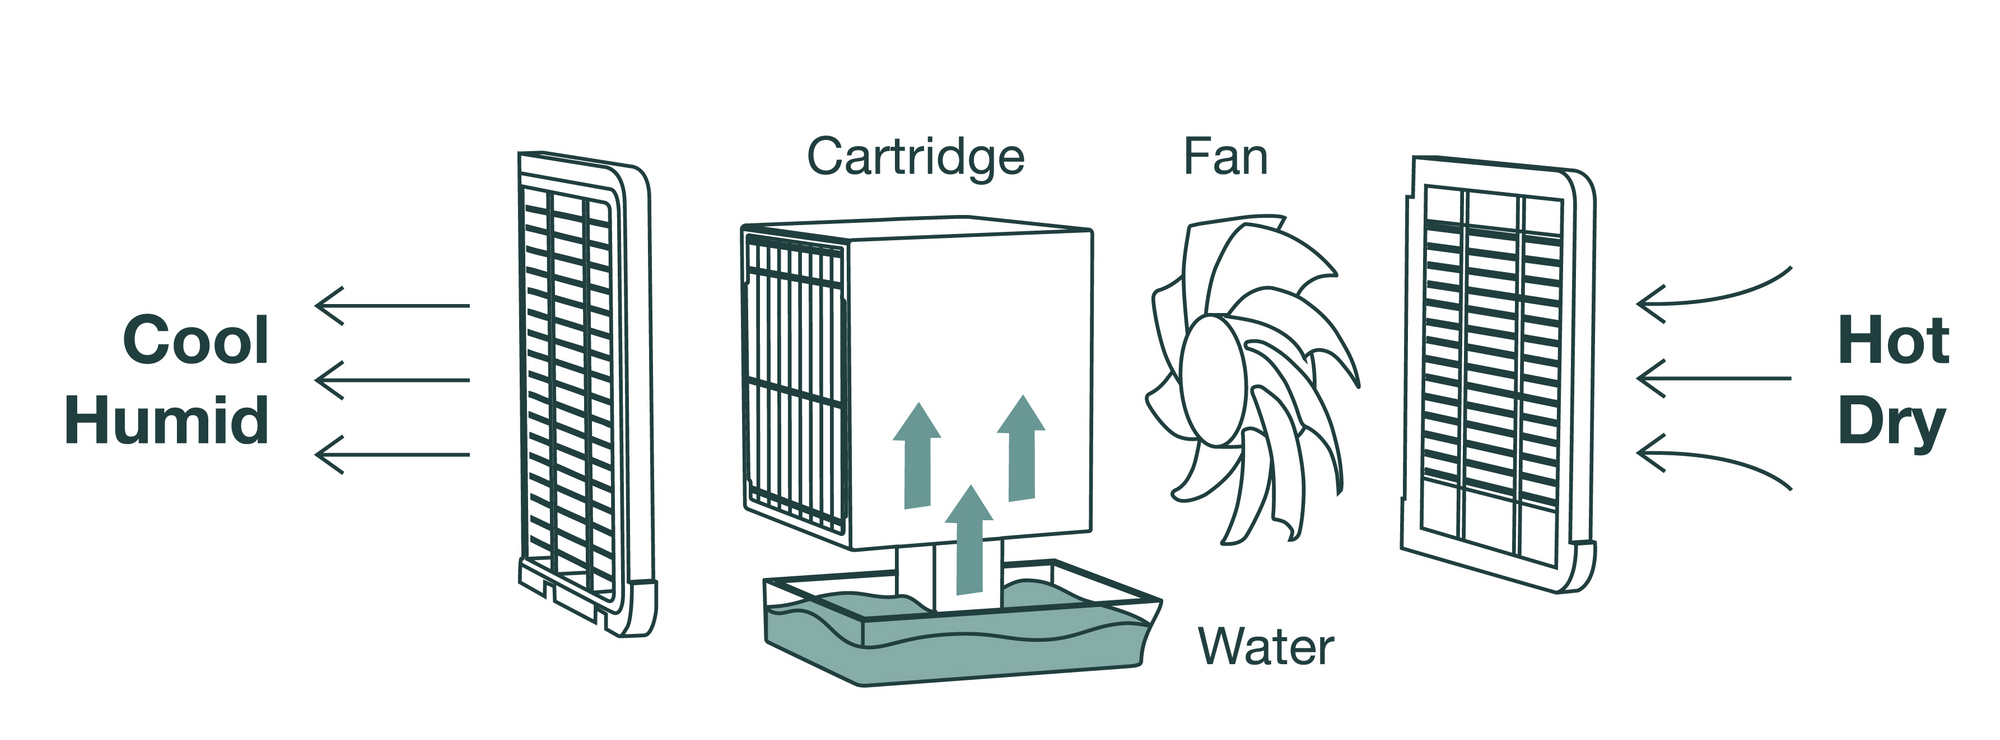 How Do Water-Cooled Air Conditioners Work?